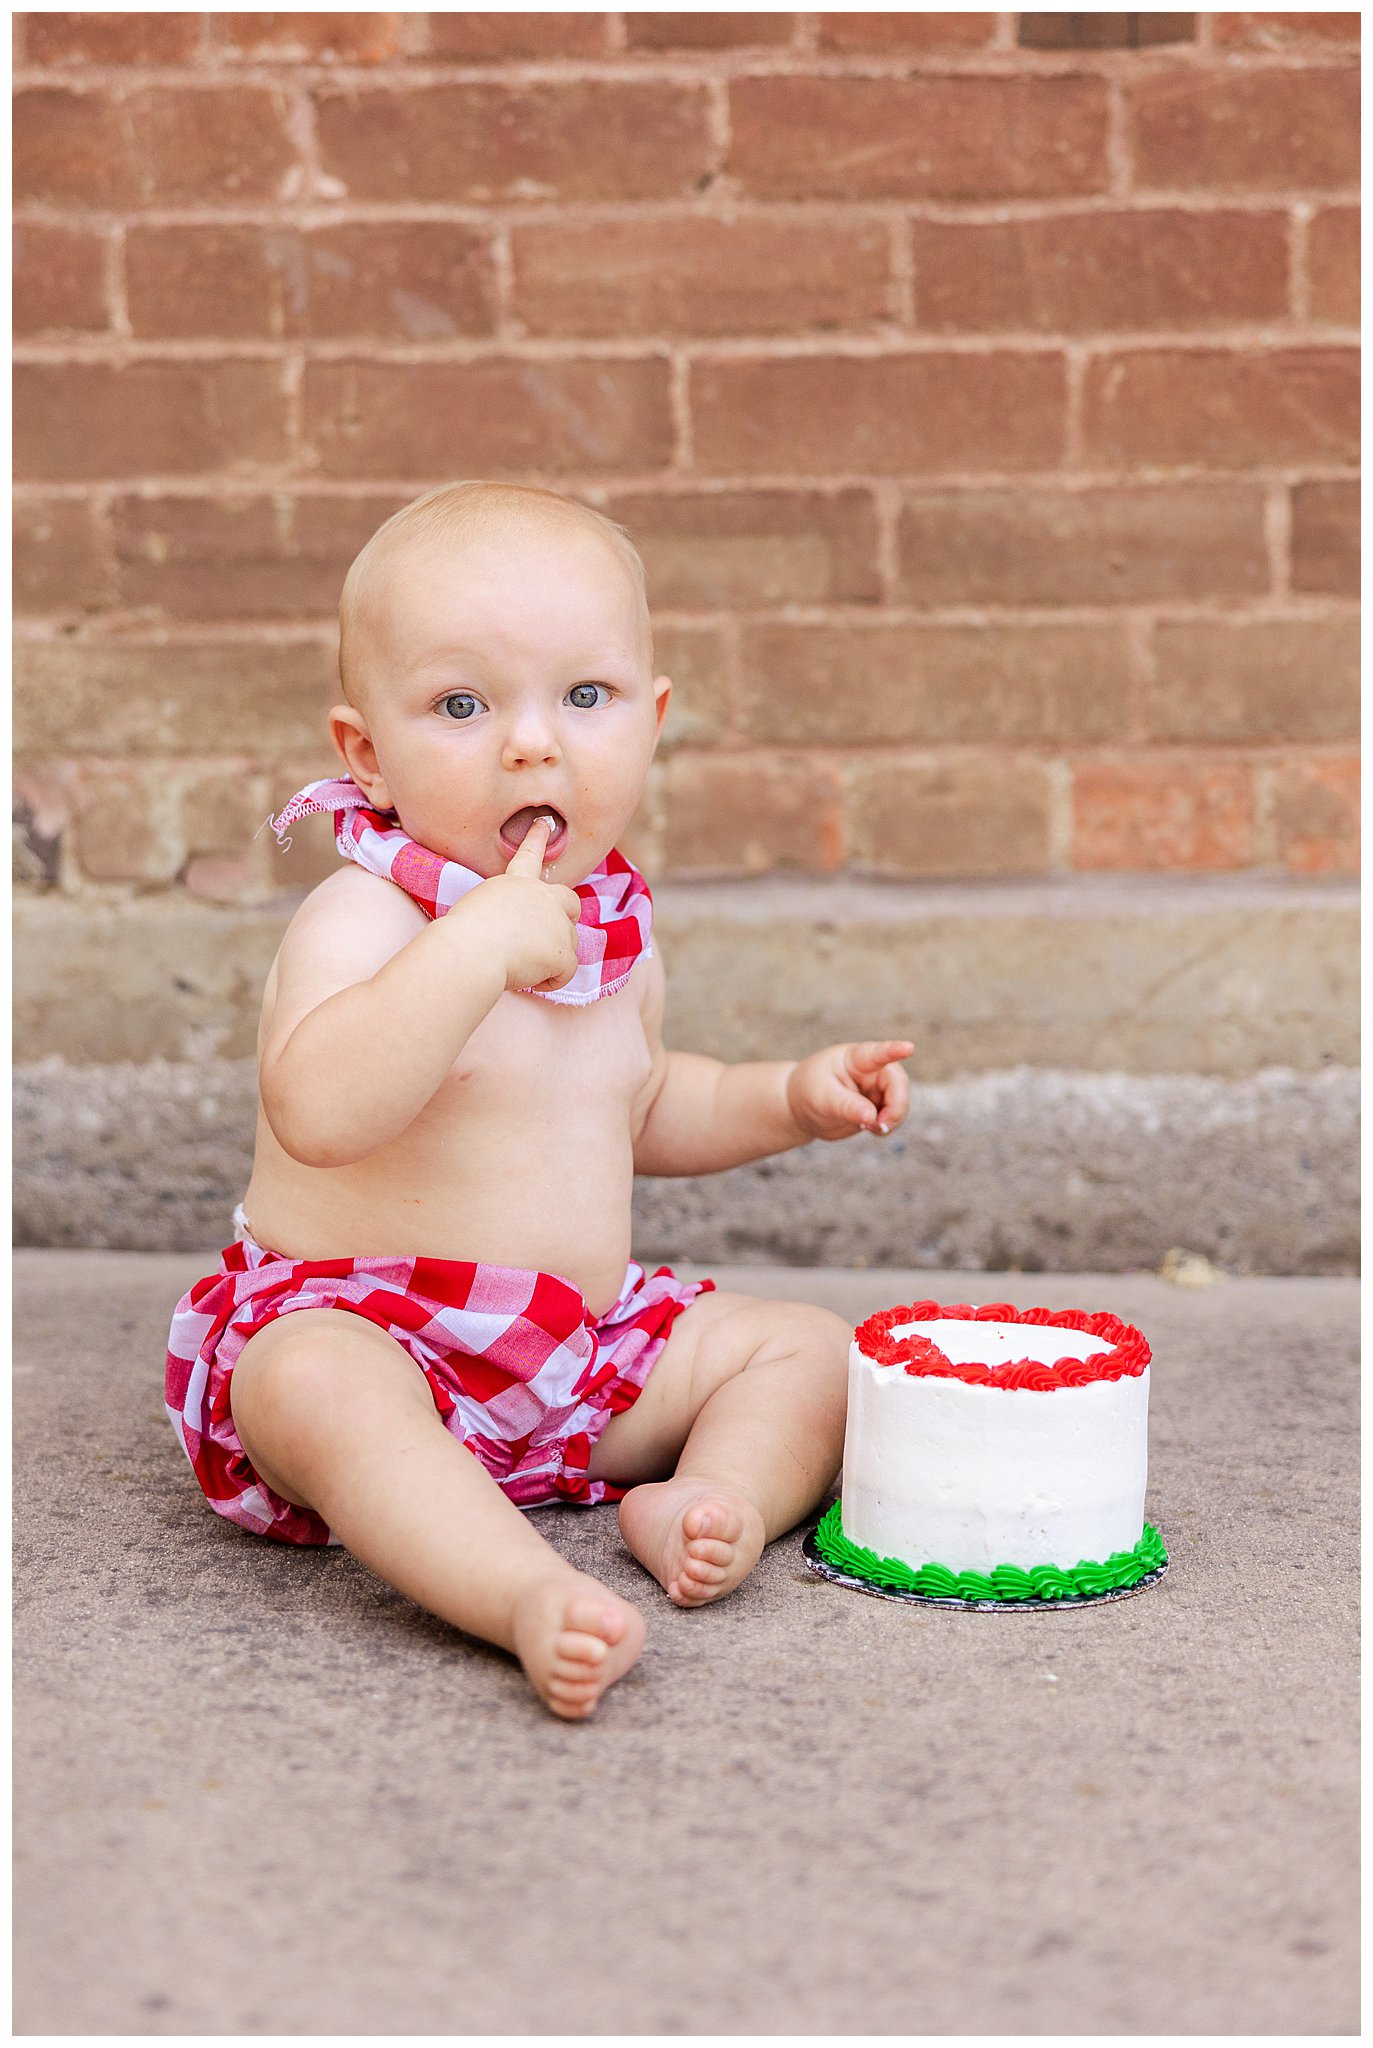 One Year Old Cake Smash Session Pizza Chef Costume Hat Chico CA Summer July,